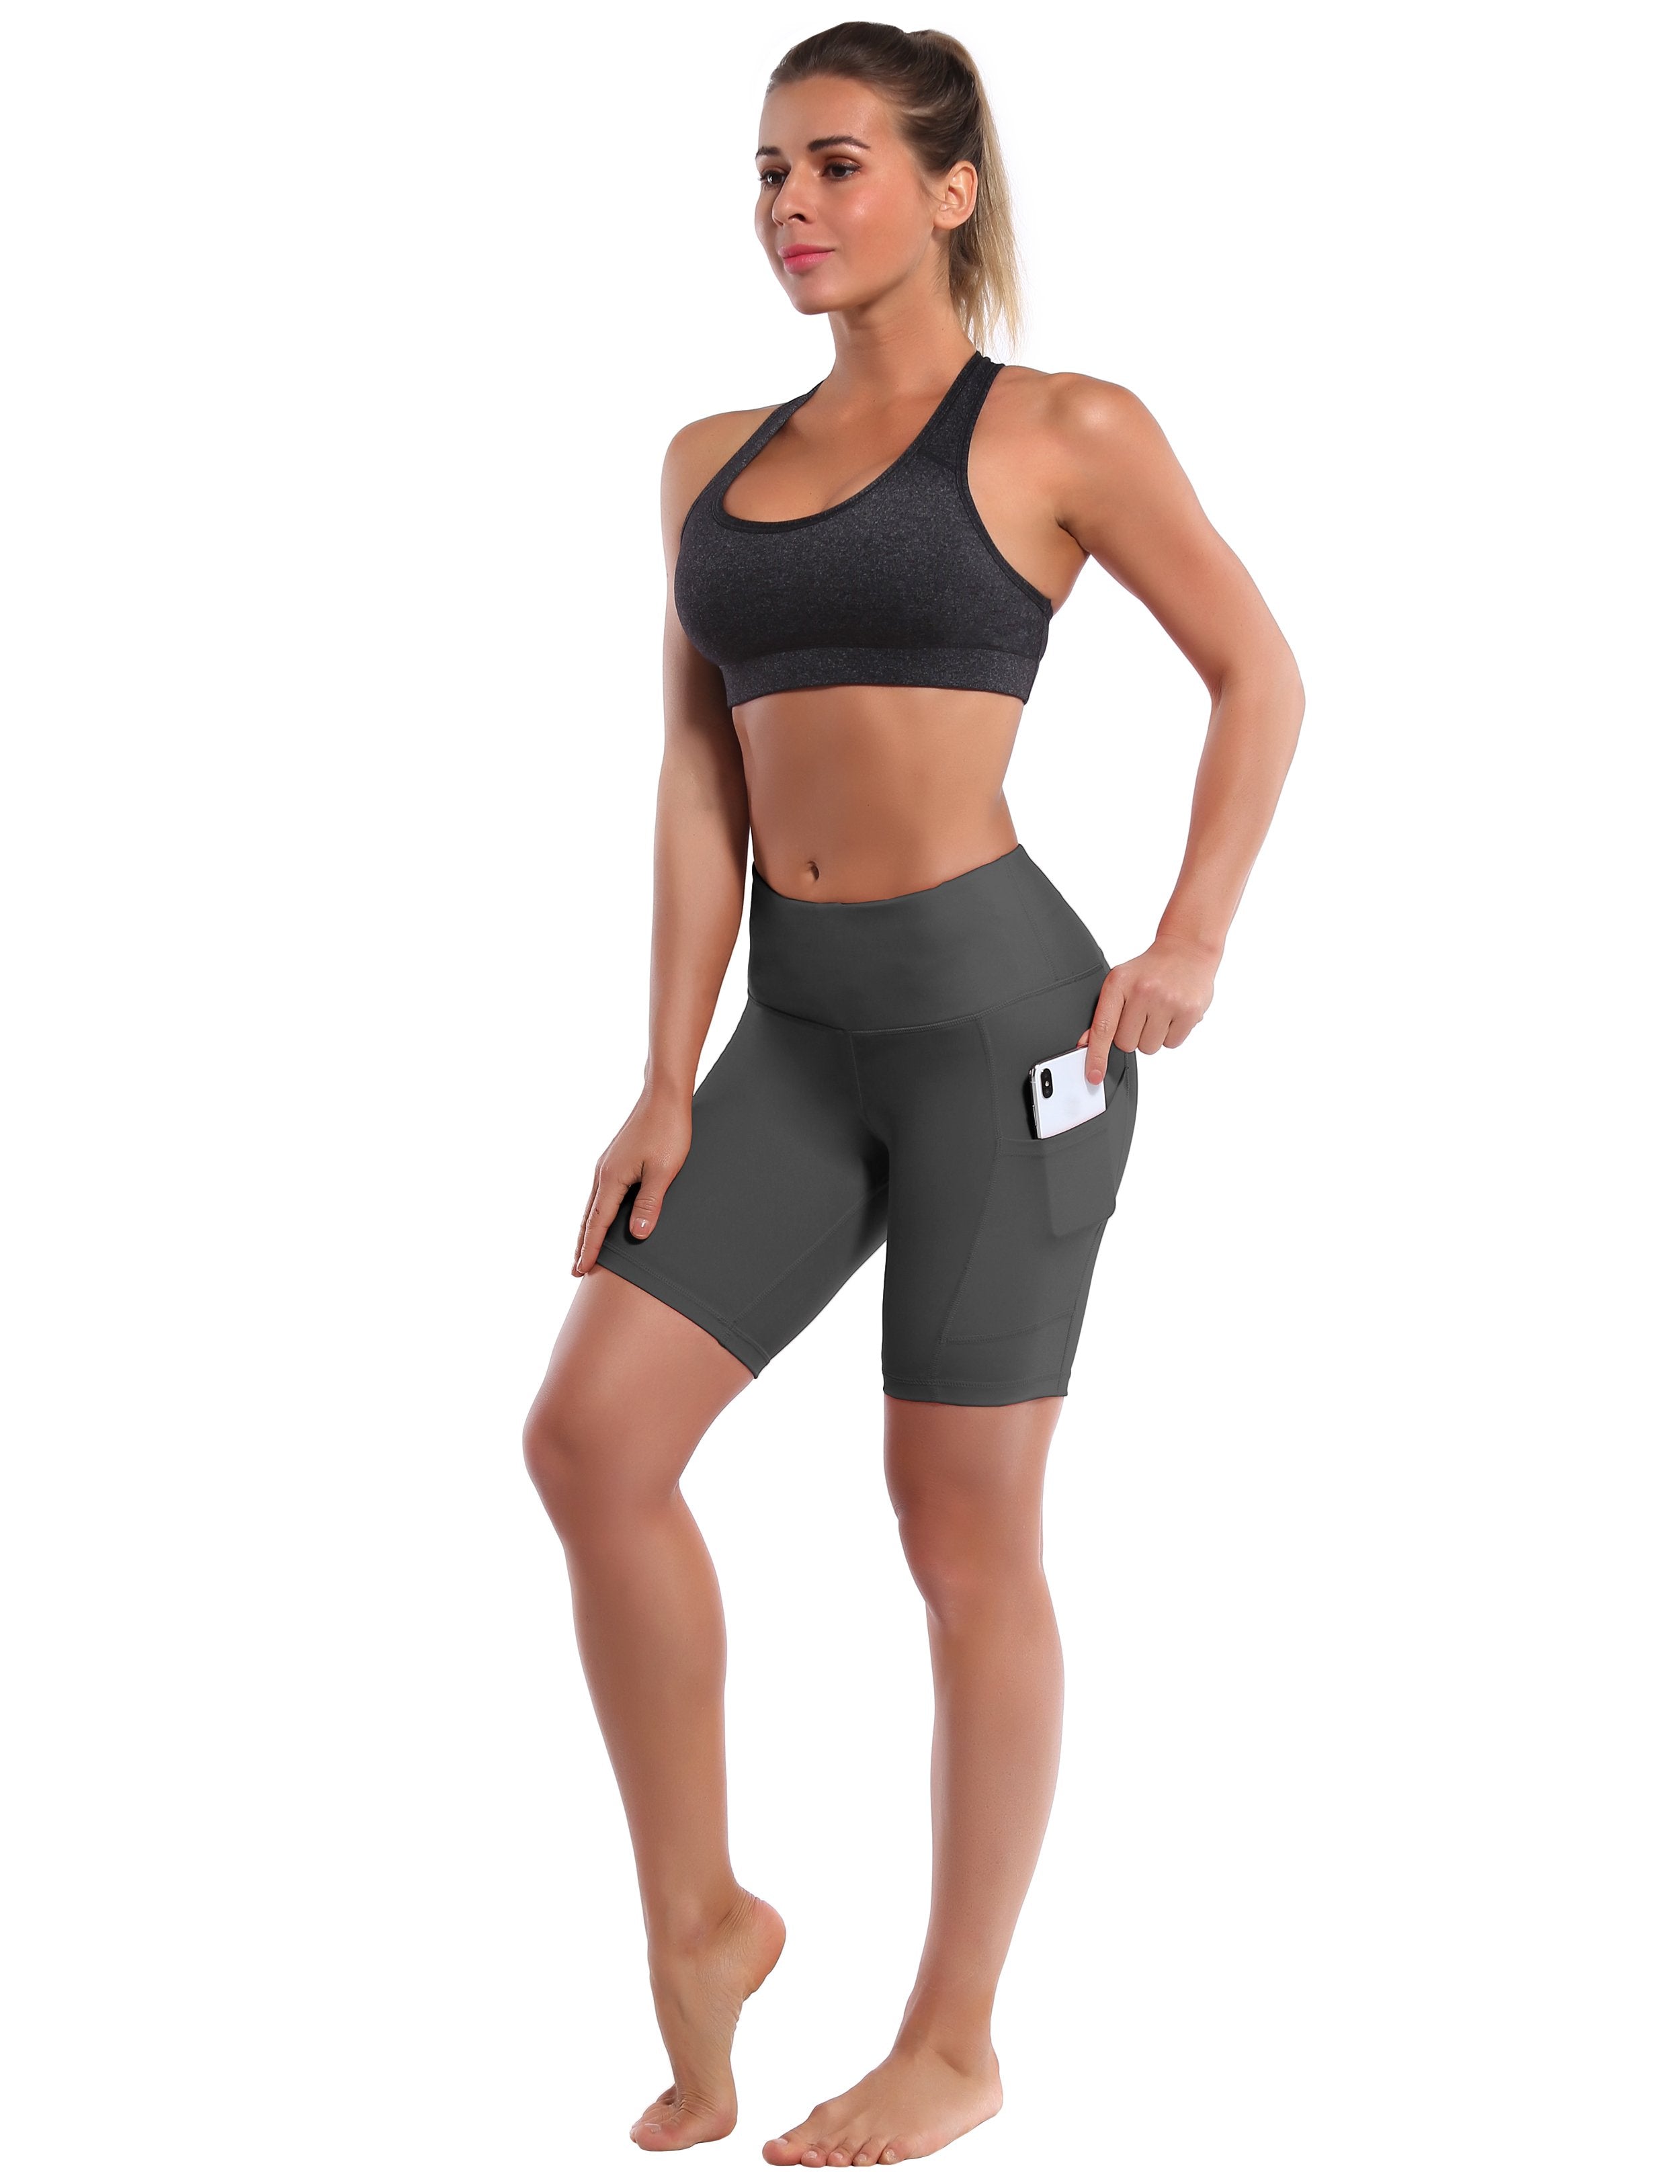 8" Side Pockets Golf Shorts shadowcharcoal Sleek, soft, smooth and totally comfortable: our newest style is here. Softest-ever fabric High elasticity High density 4-way stretch Fabric doesn't attract lint easily No see-through Moisture-wicking Machine wash 75% Nylon, 25% Spandex